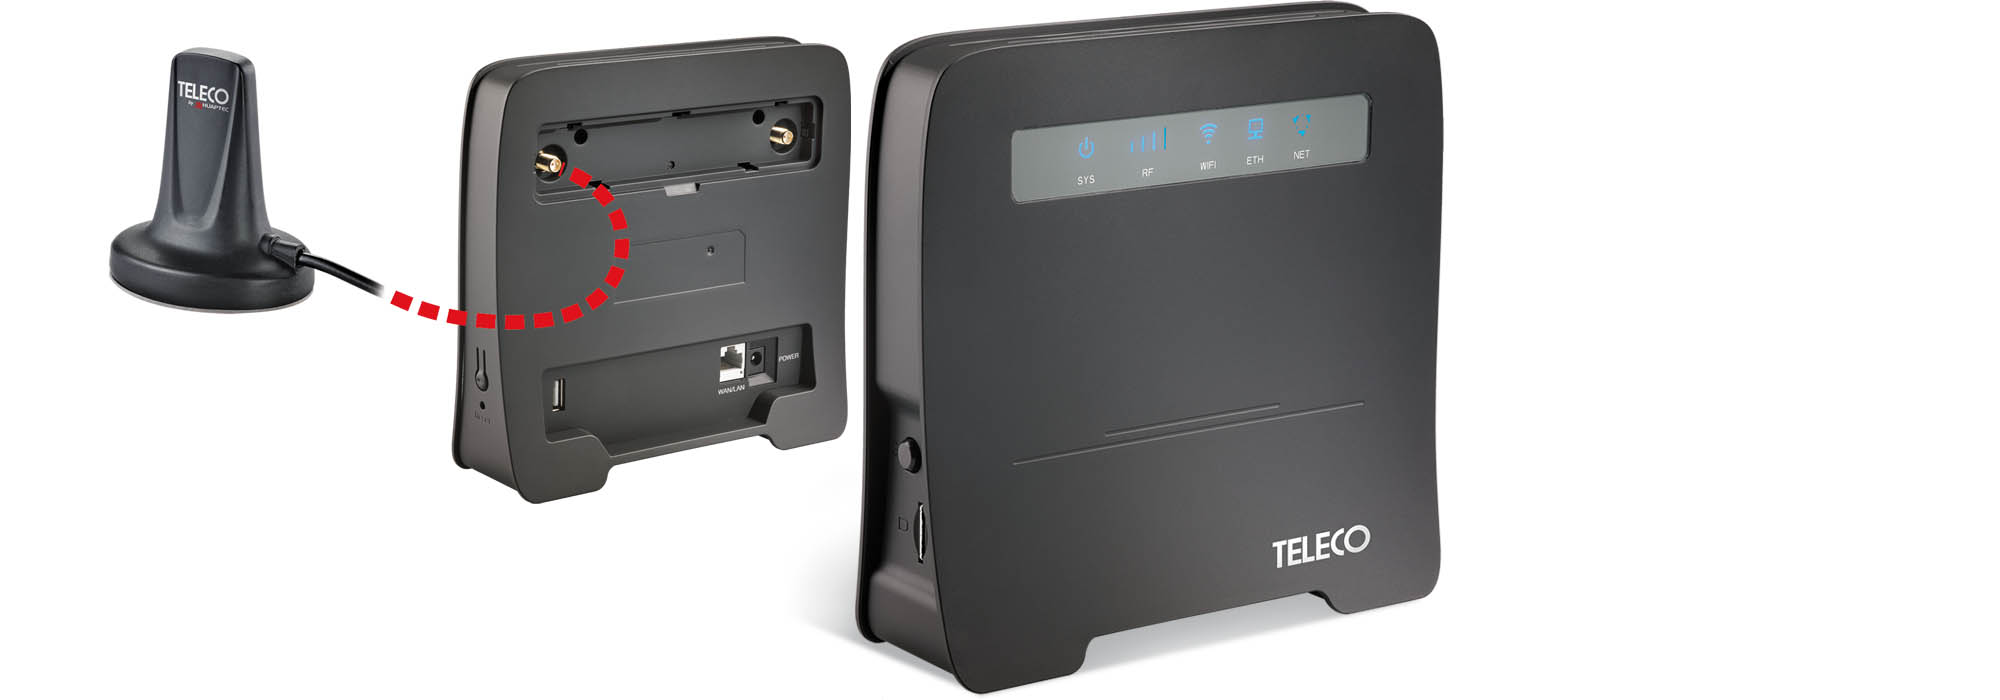 Internet for all the family with the WiFi VAN T400 router